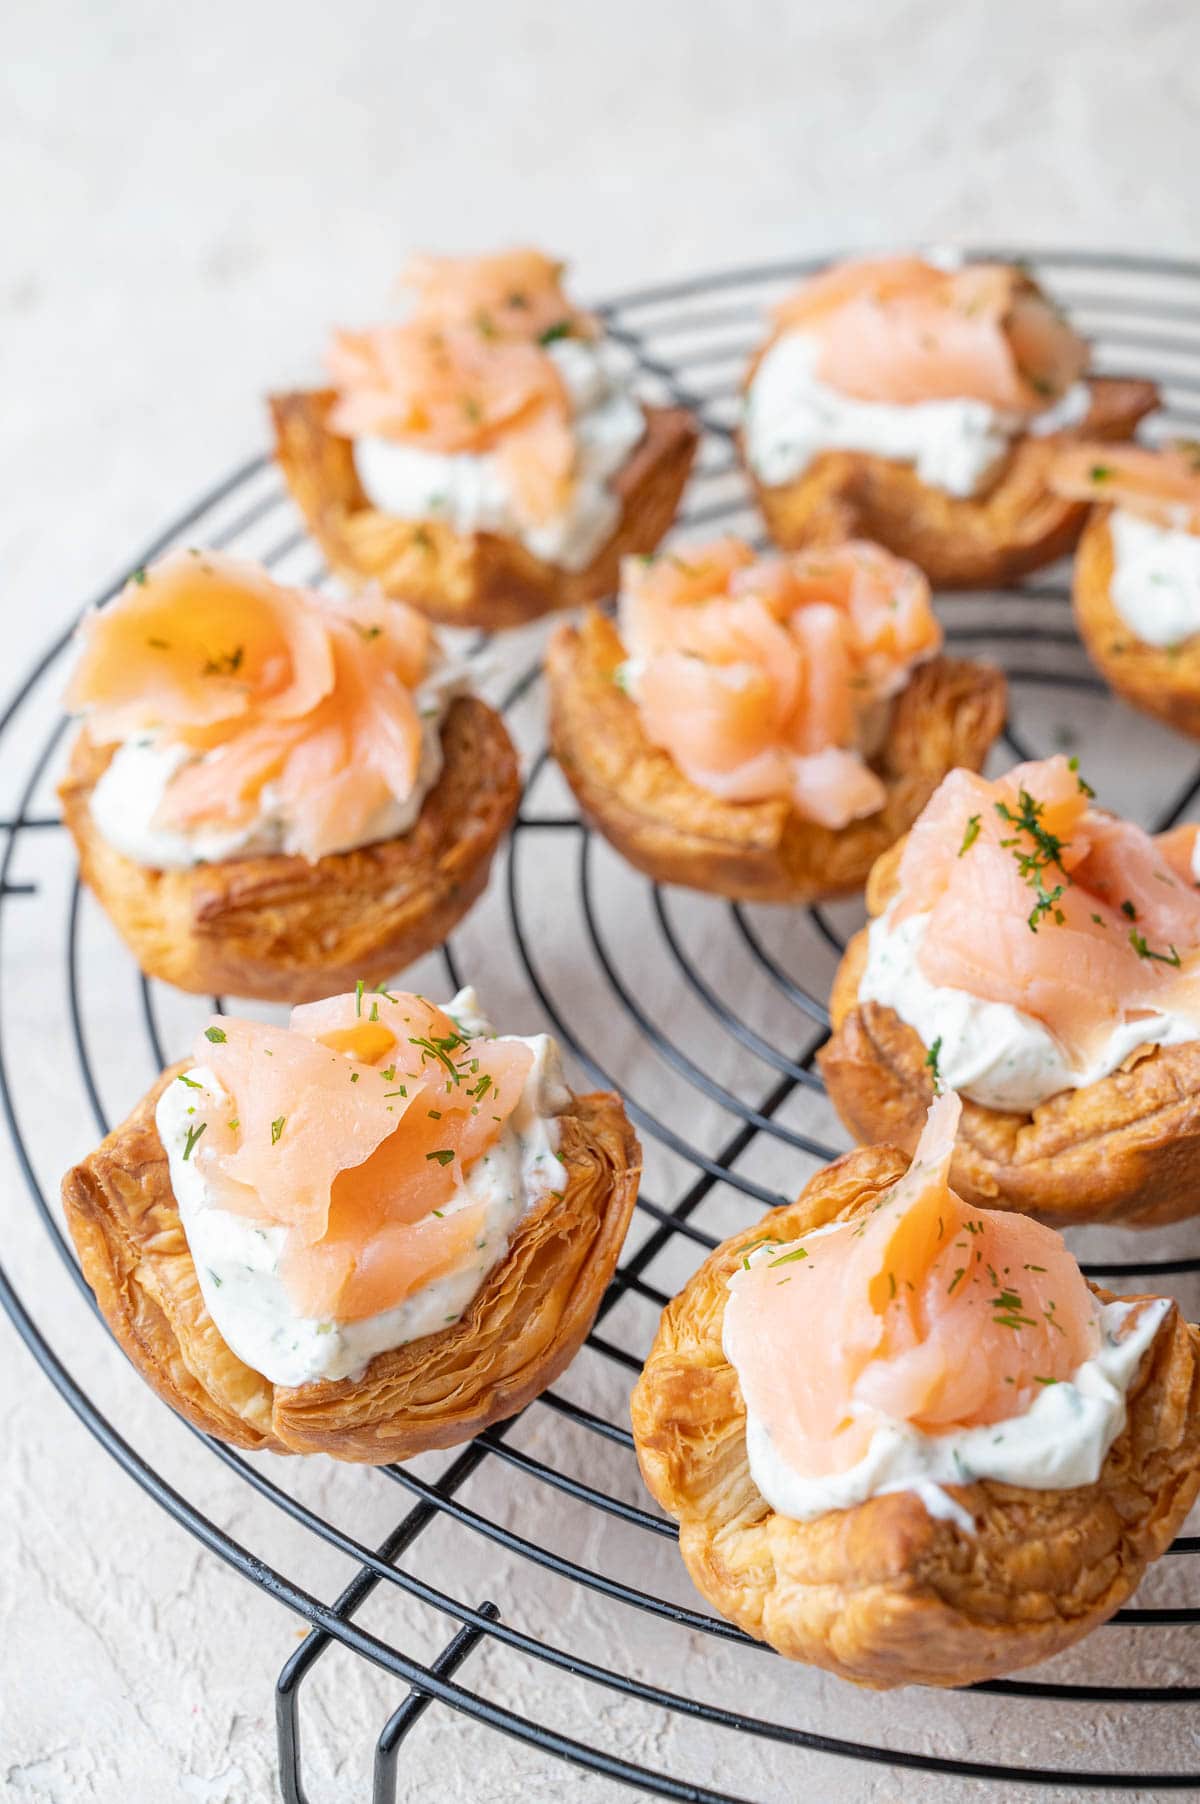 Smoked salmon puff pastry bites on a black wire rack.